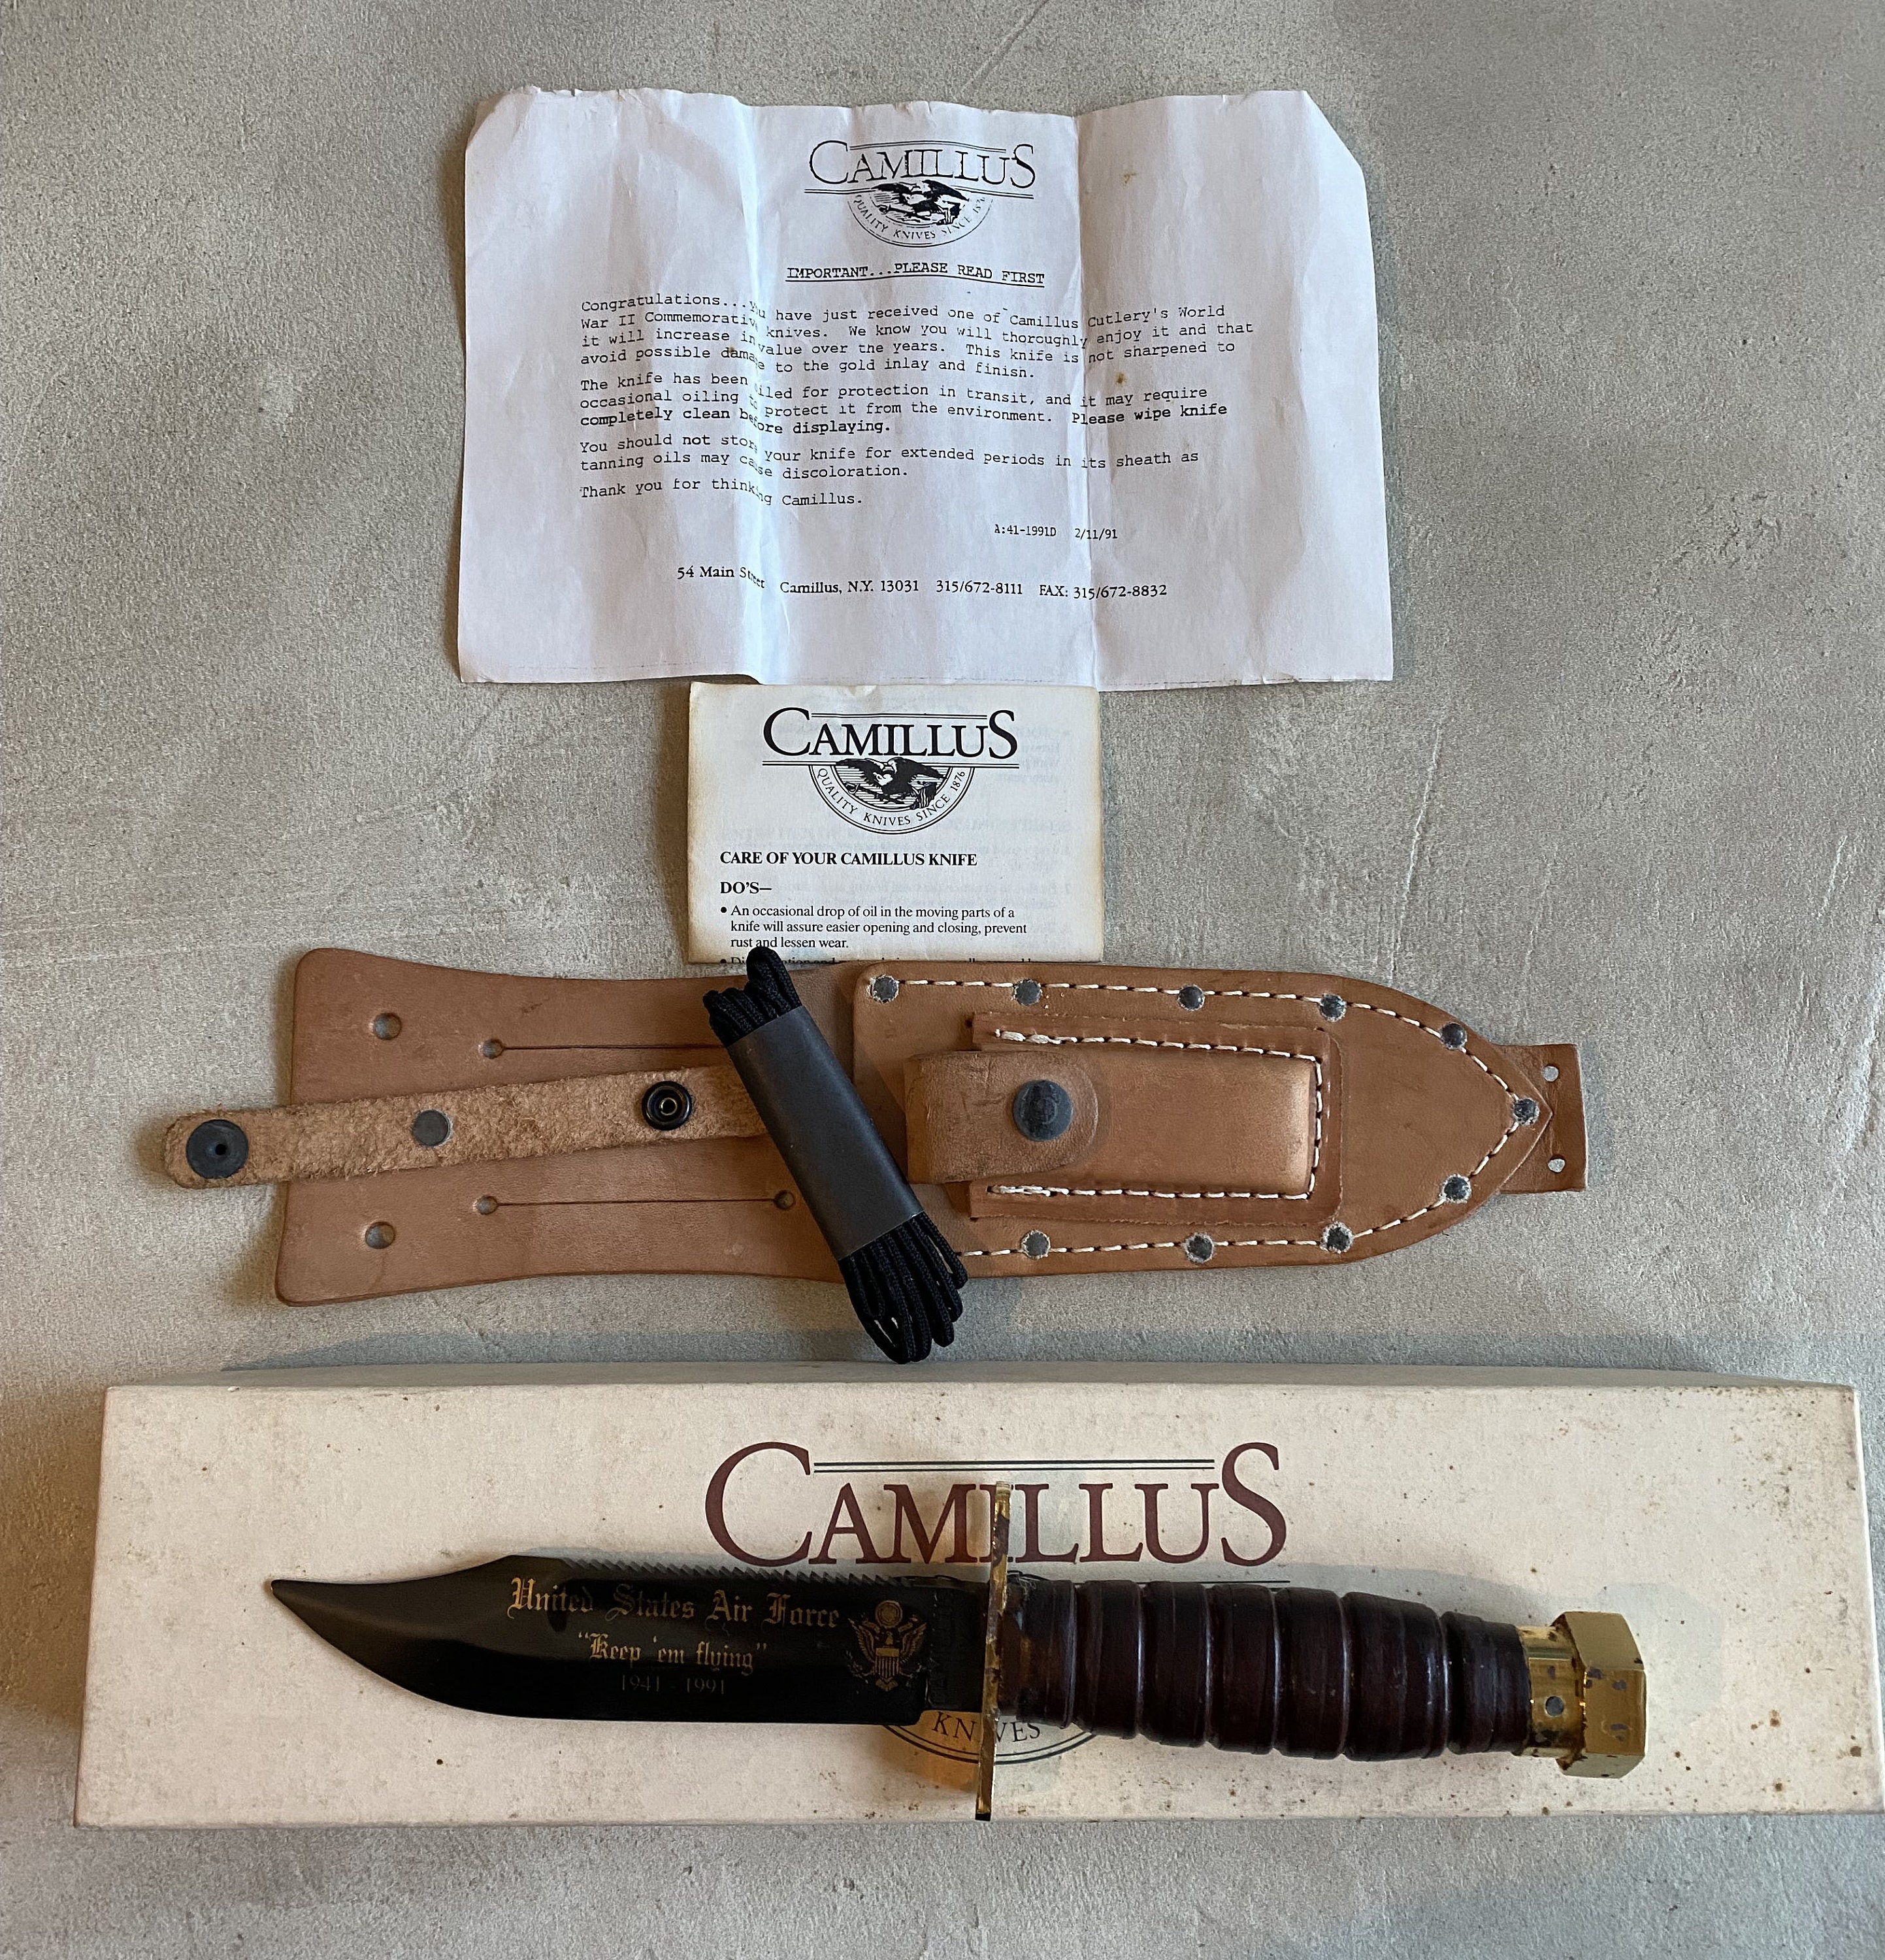 Get Started Making Your Own Knife with a Camillus Knife Kit  Camillus  Brand has an option for anyone who wants to make their own personalized  knife. We got Sam from Camillus